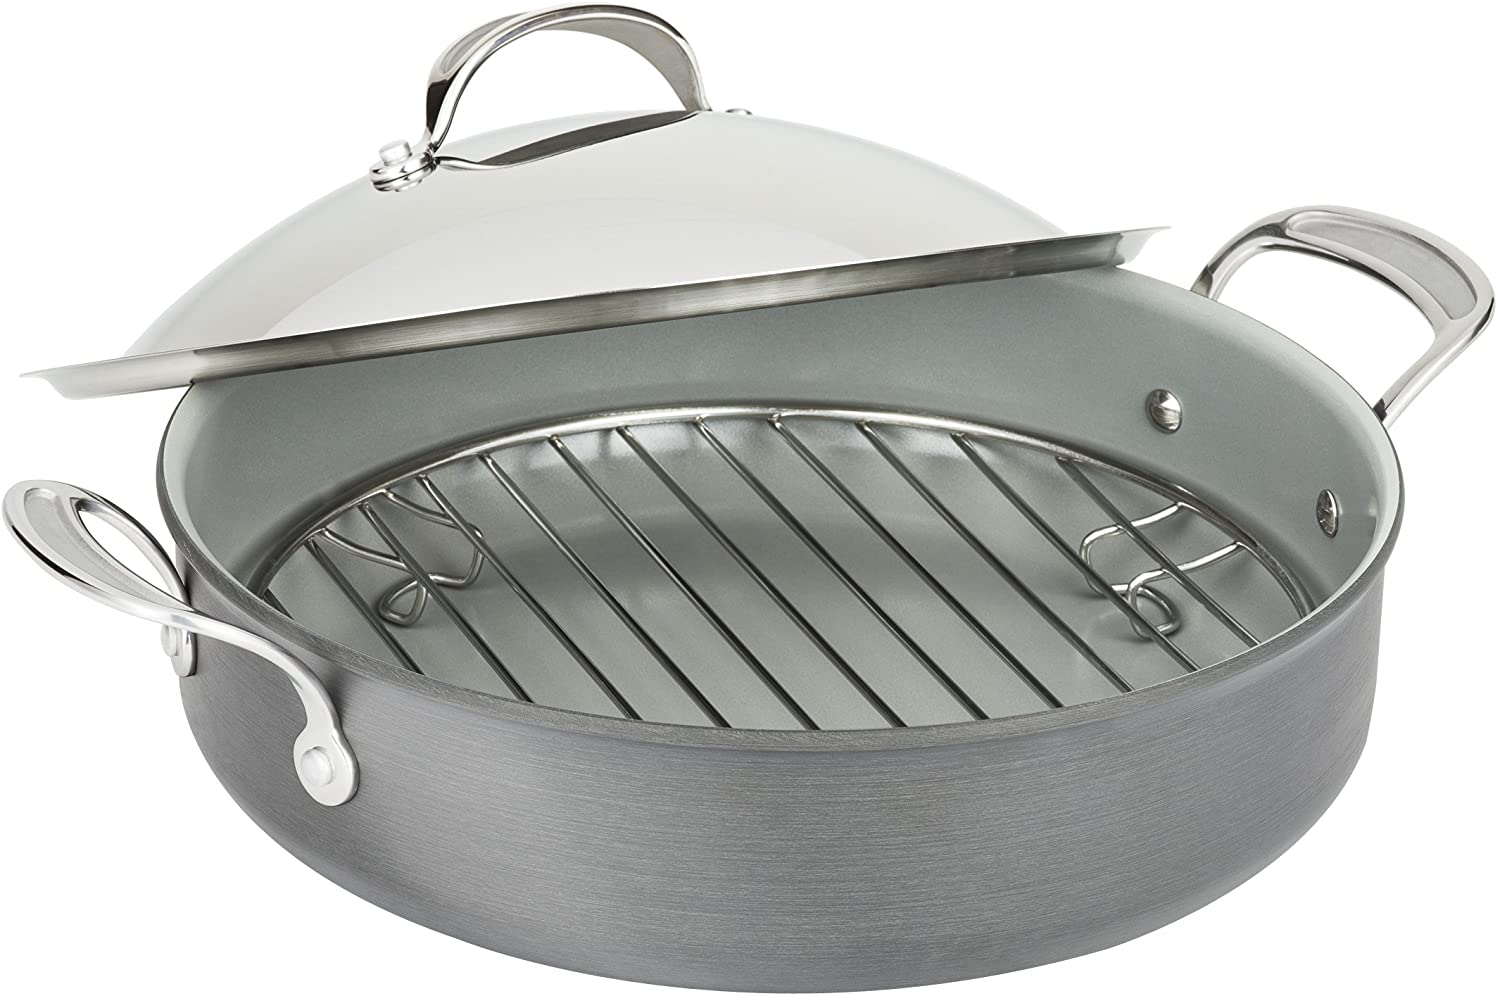 Tefal Jamie Oliver E76690 Phone Hard Anodized Aluminium Sauté Bäter with Stainless Steel Lid and Netting (30 cm, anthracite